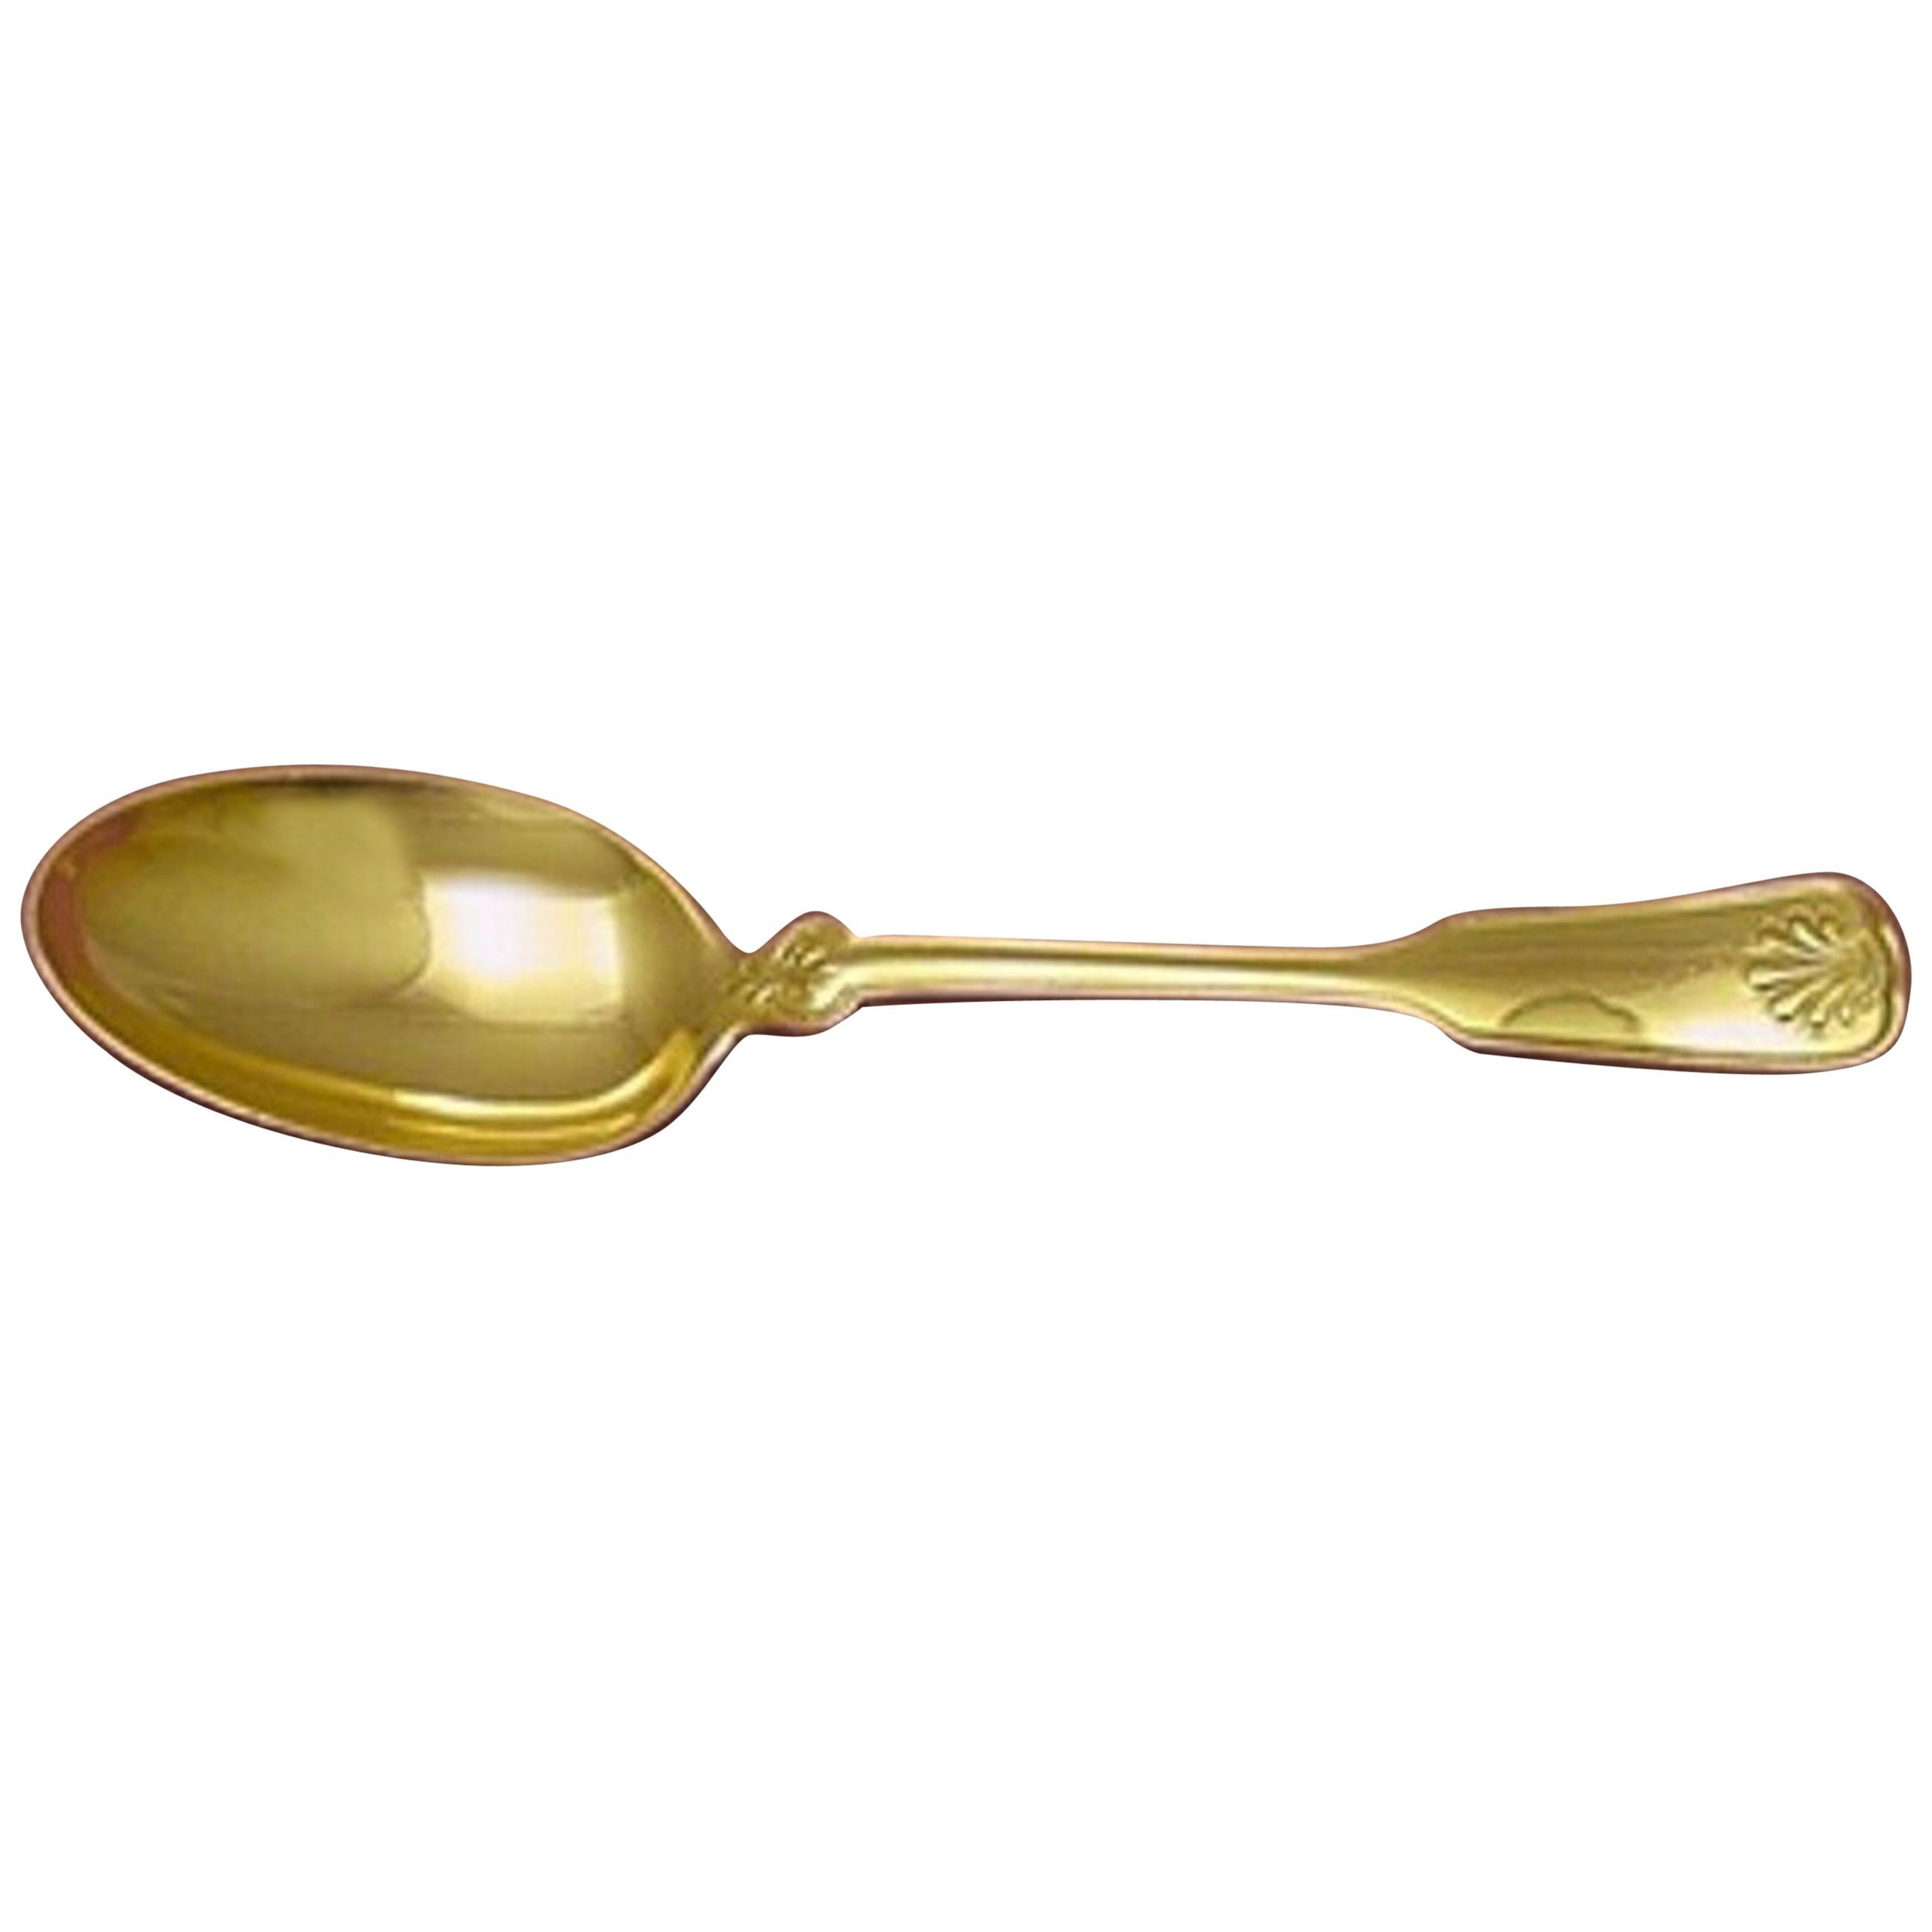 Shell and Thread Vermeil by Tiffany & Co Sterling Silver Teaspoon